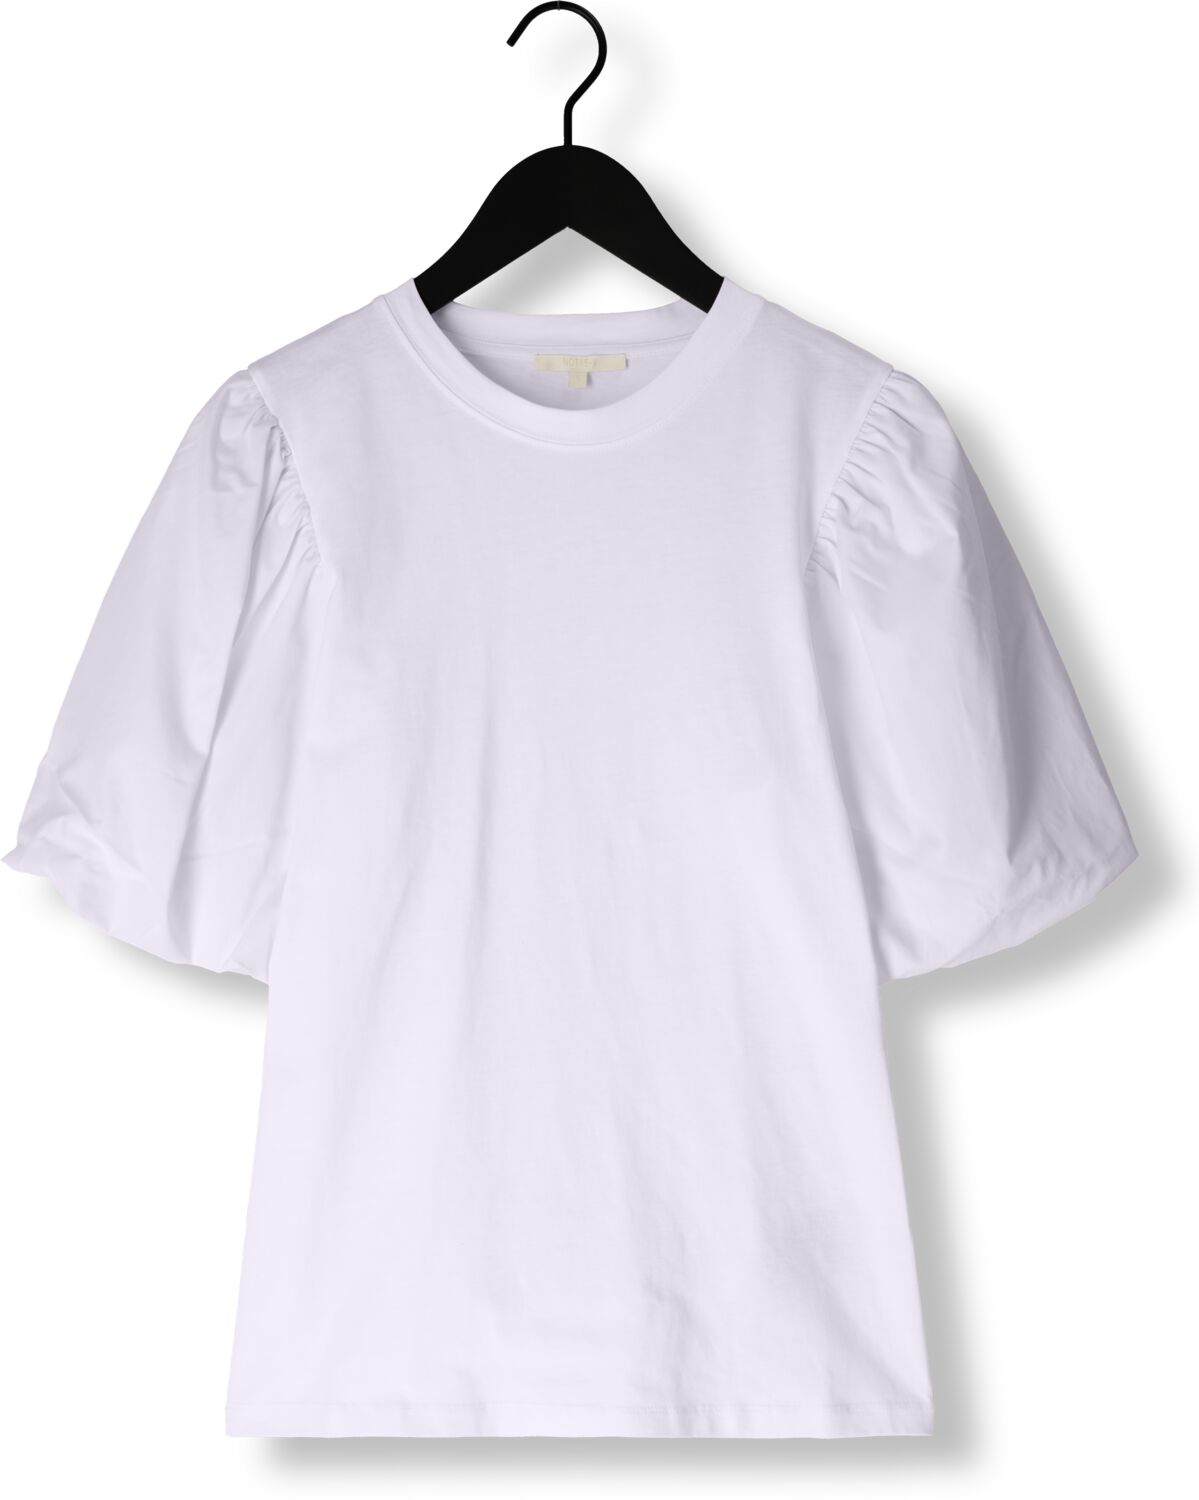 NOTRE-V Dames Tops & T-shirts Nv-dolf Puff Sleeve Top Wit